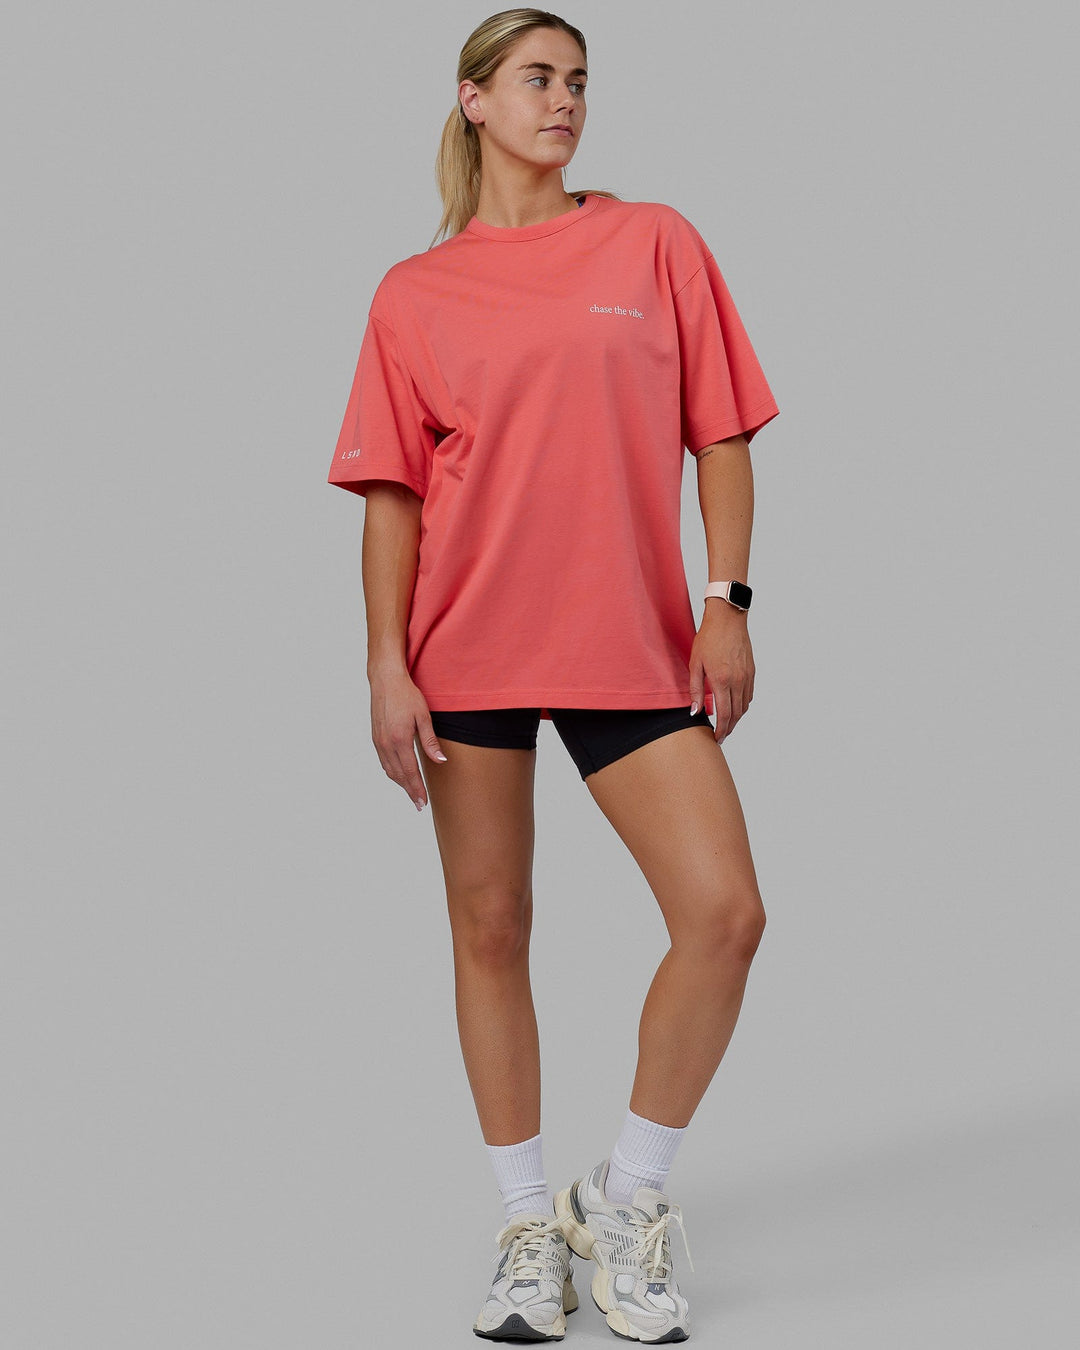 Woman wearing Unisex Taylor Tee Oversize - Coral